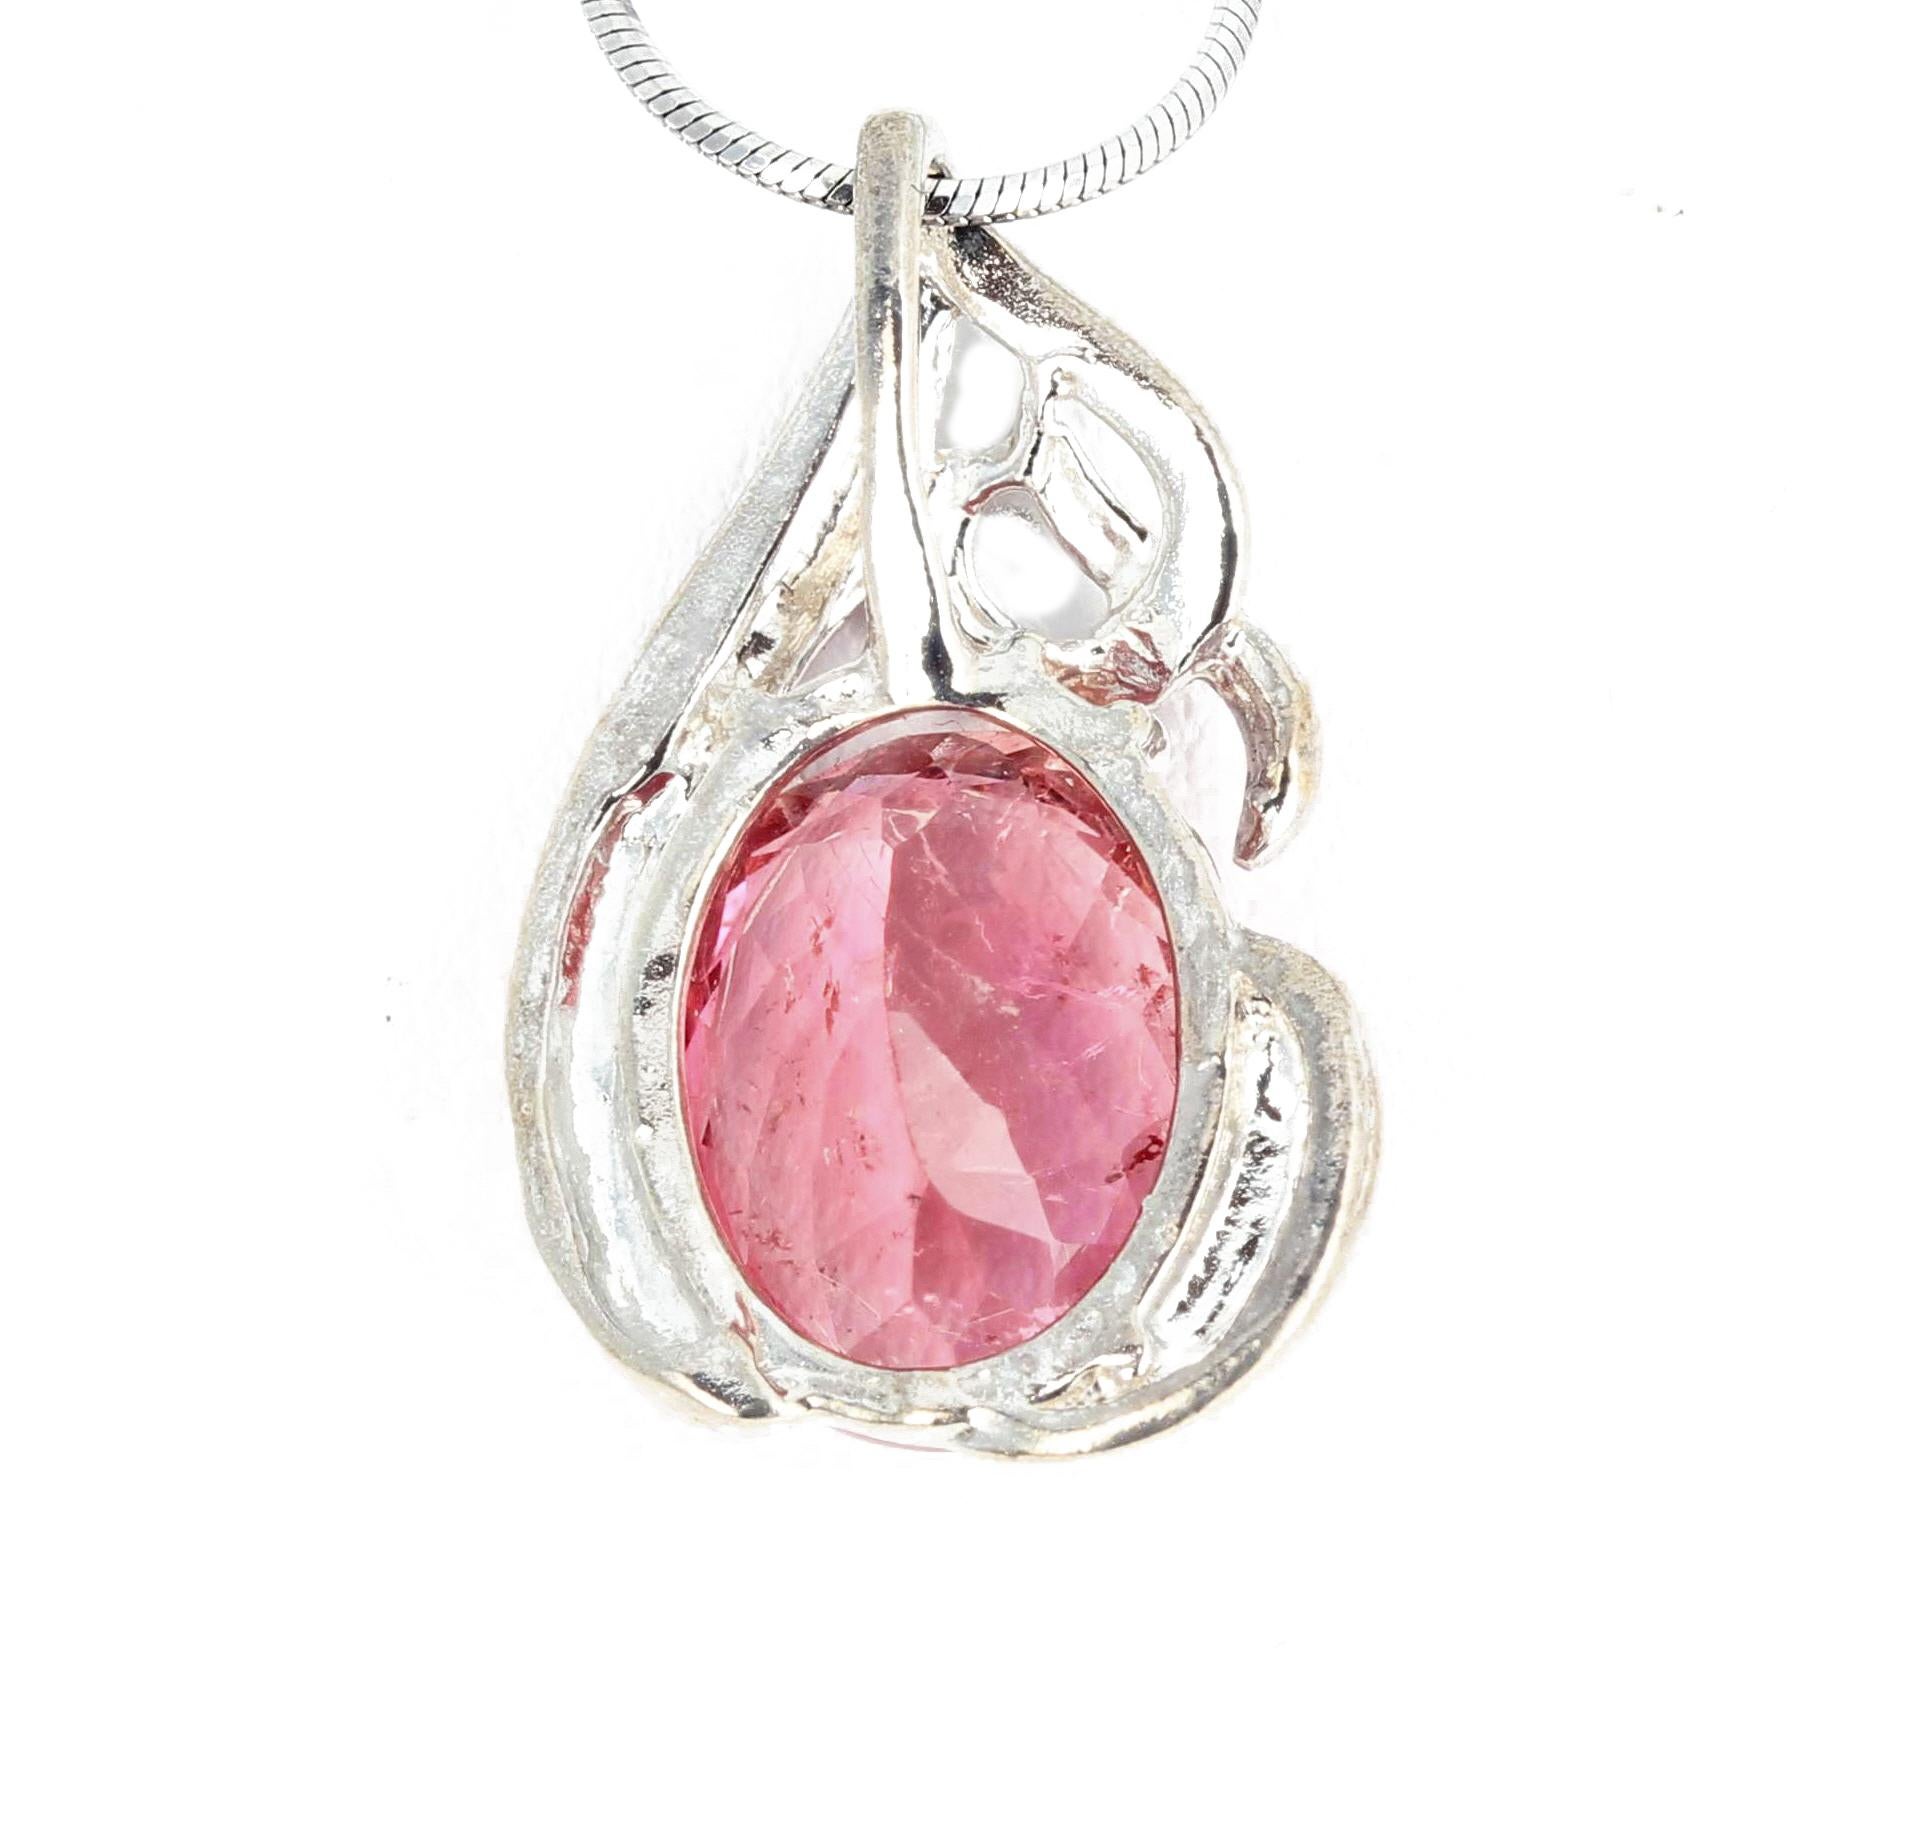 Oval Cut AJD Stunning 7 Cts Bright Pink/Apricot Natural Tourmaline Silver Pendant For Sale